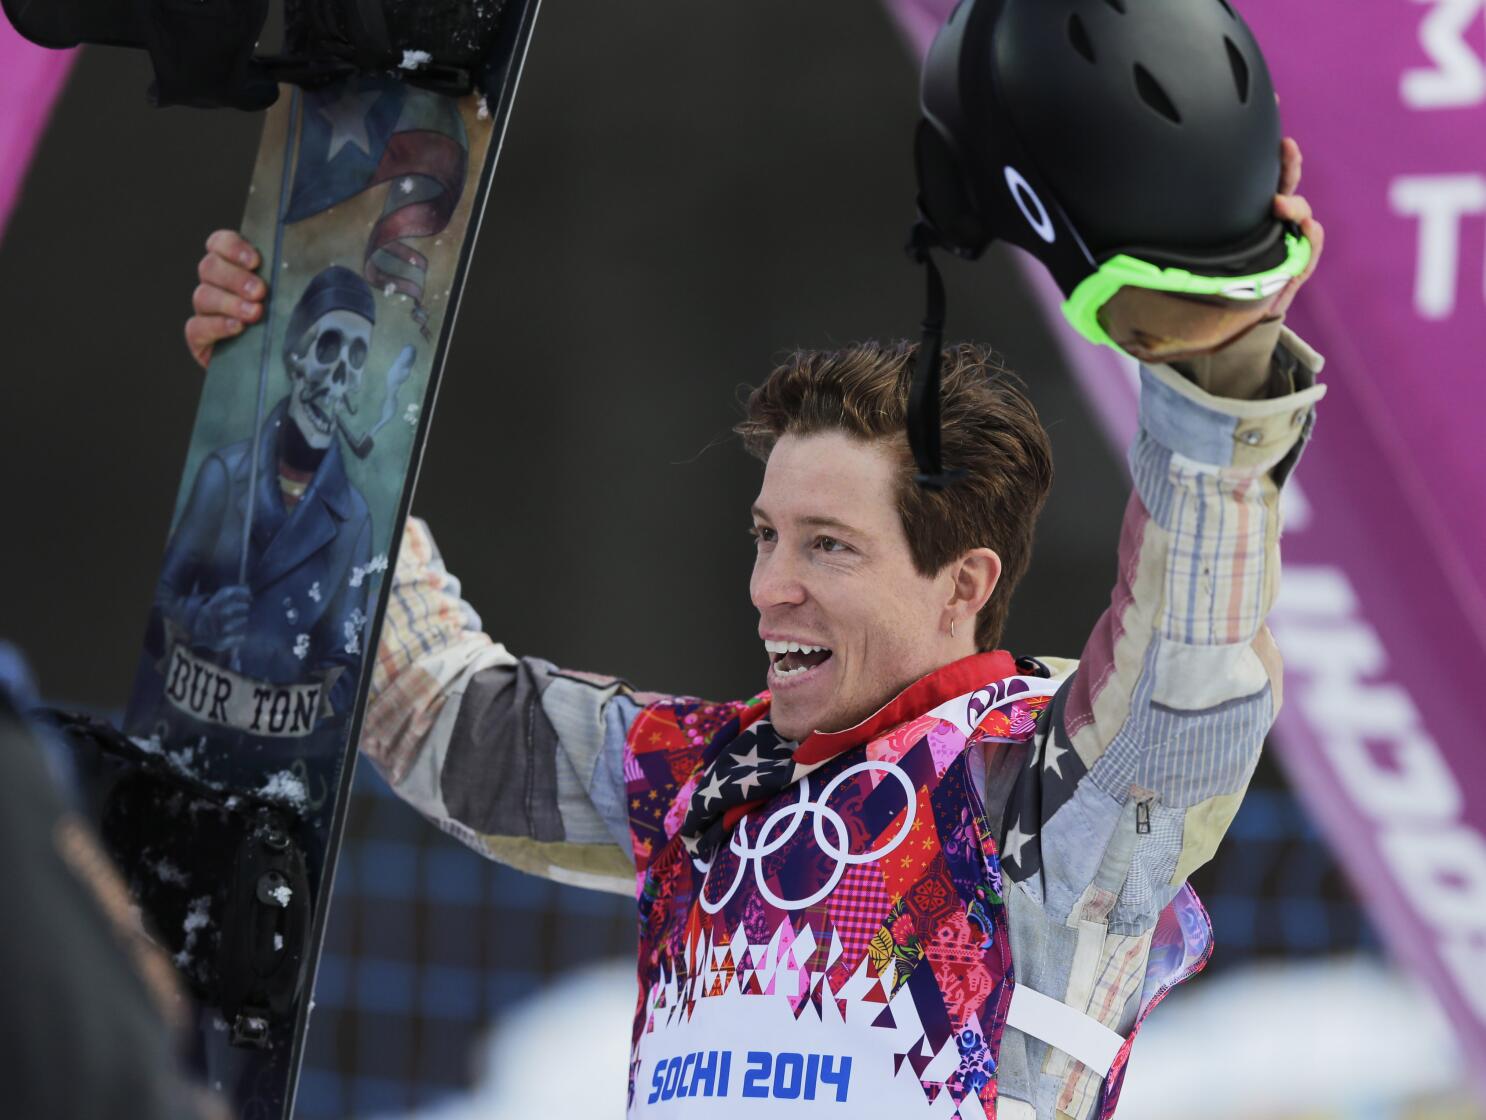 Shaun White says 2022 Olympics will be his final competition